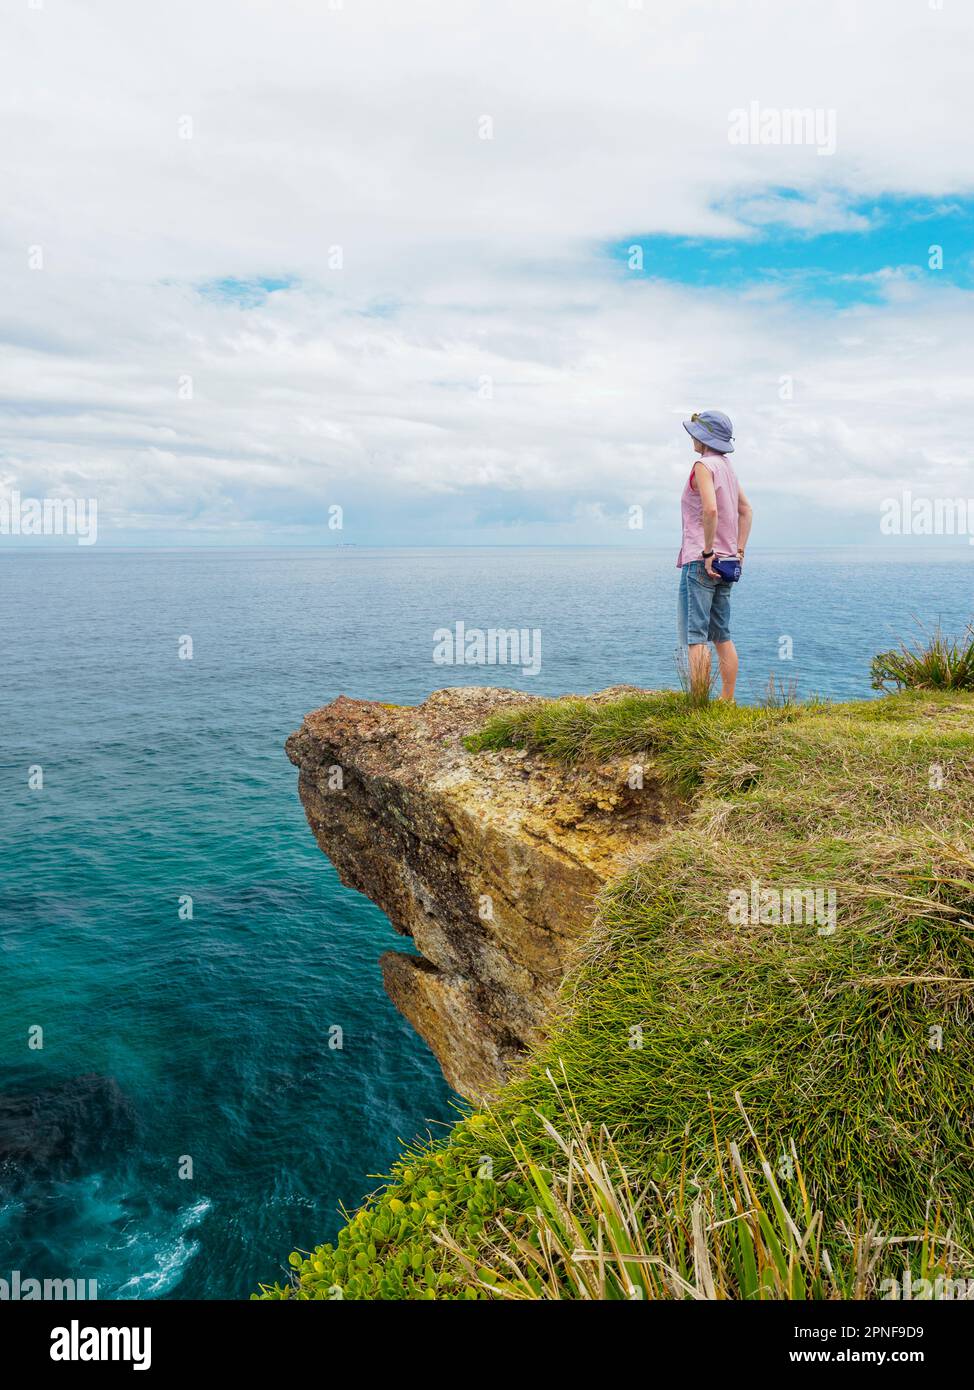 Australia, New South Wales, Port Macquarie, Woman standing on cliff and looking at view Stock Photo